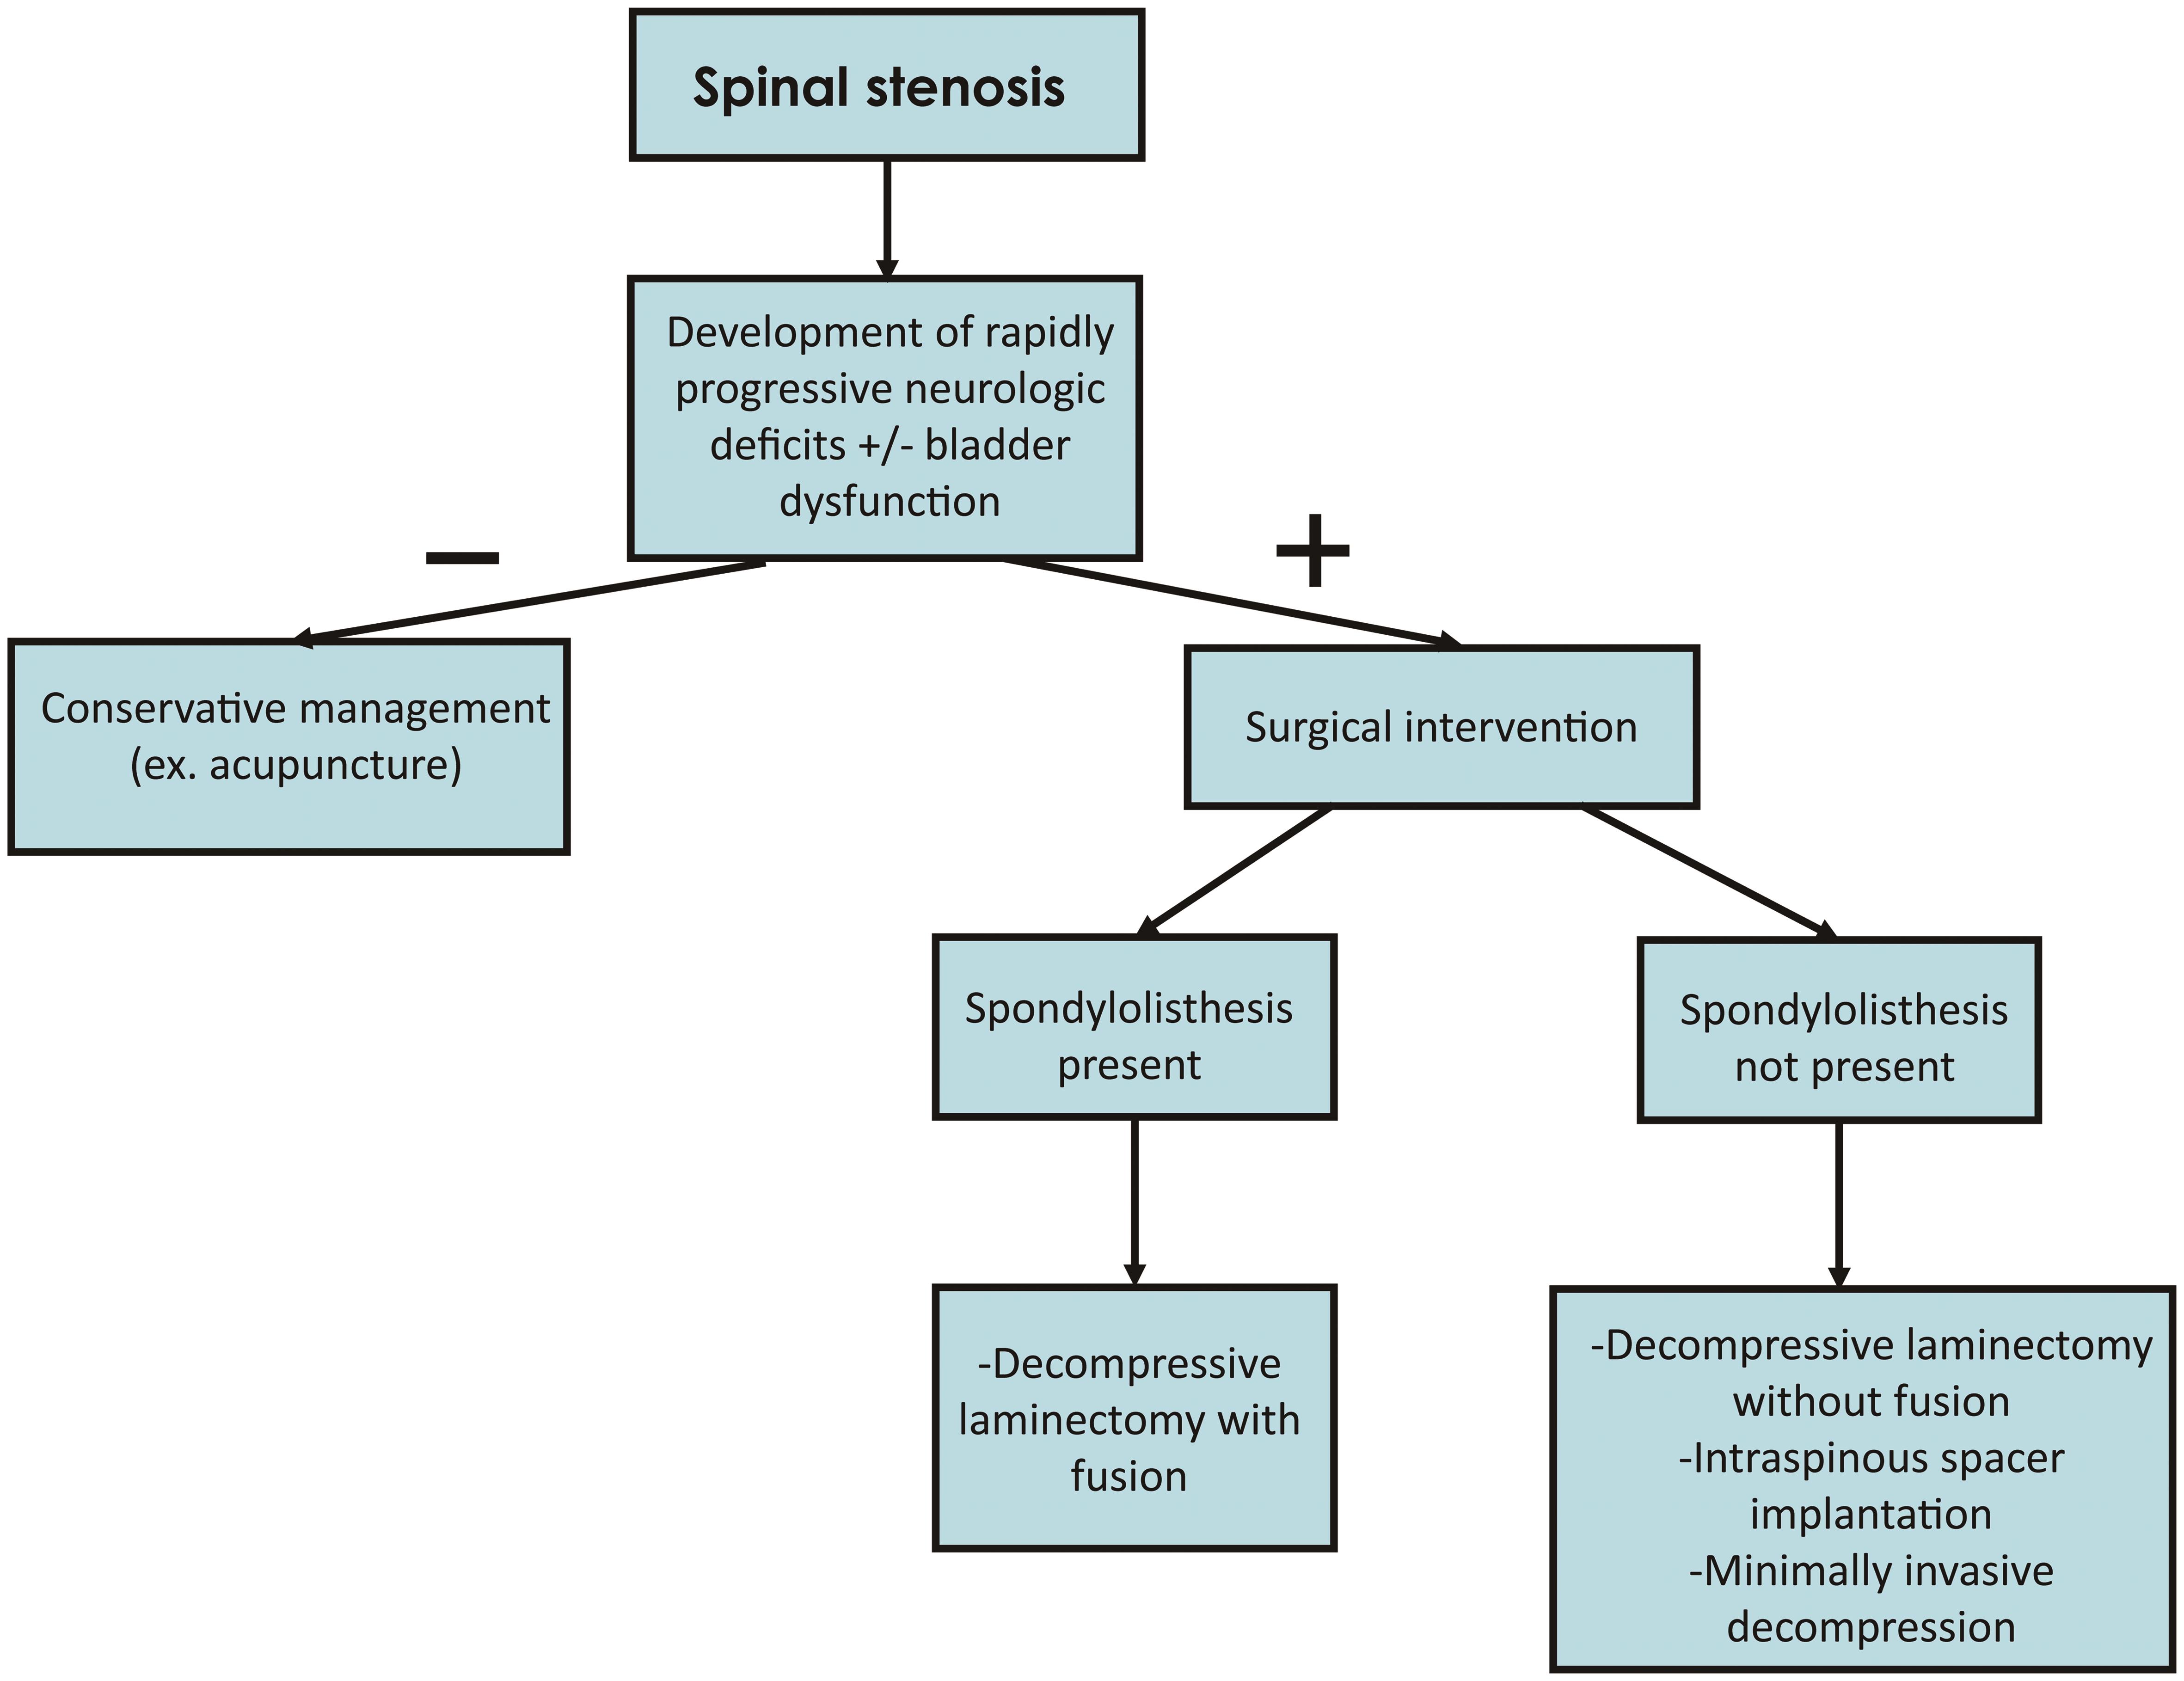 Advanced care surgical algorithm for spinal stenosis patients.